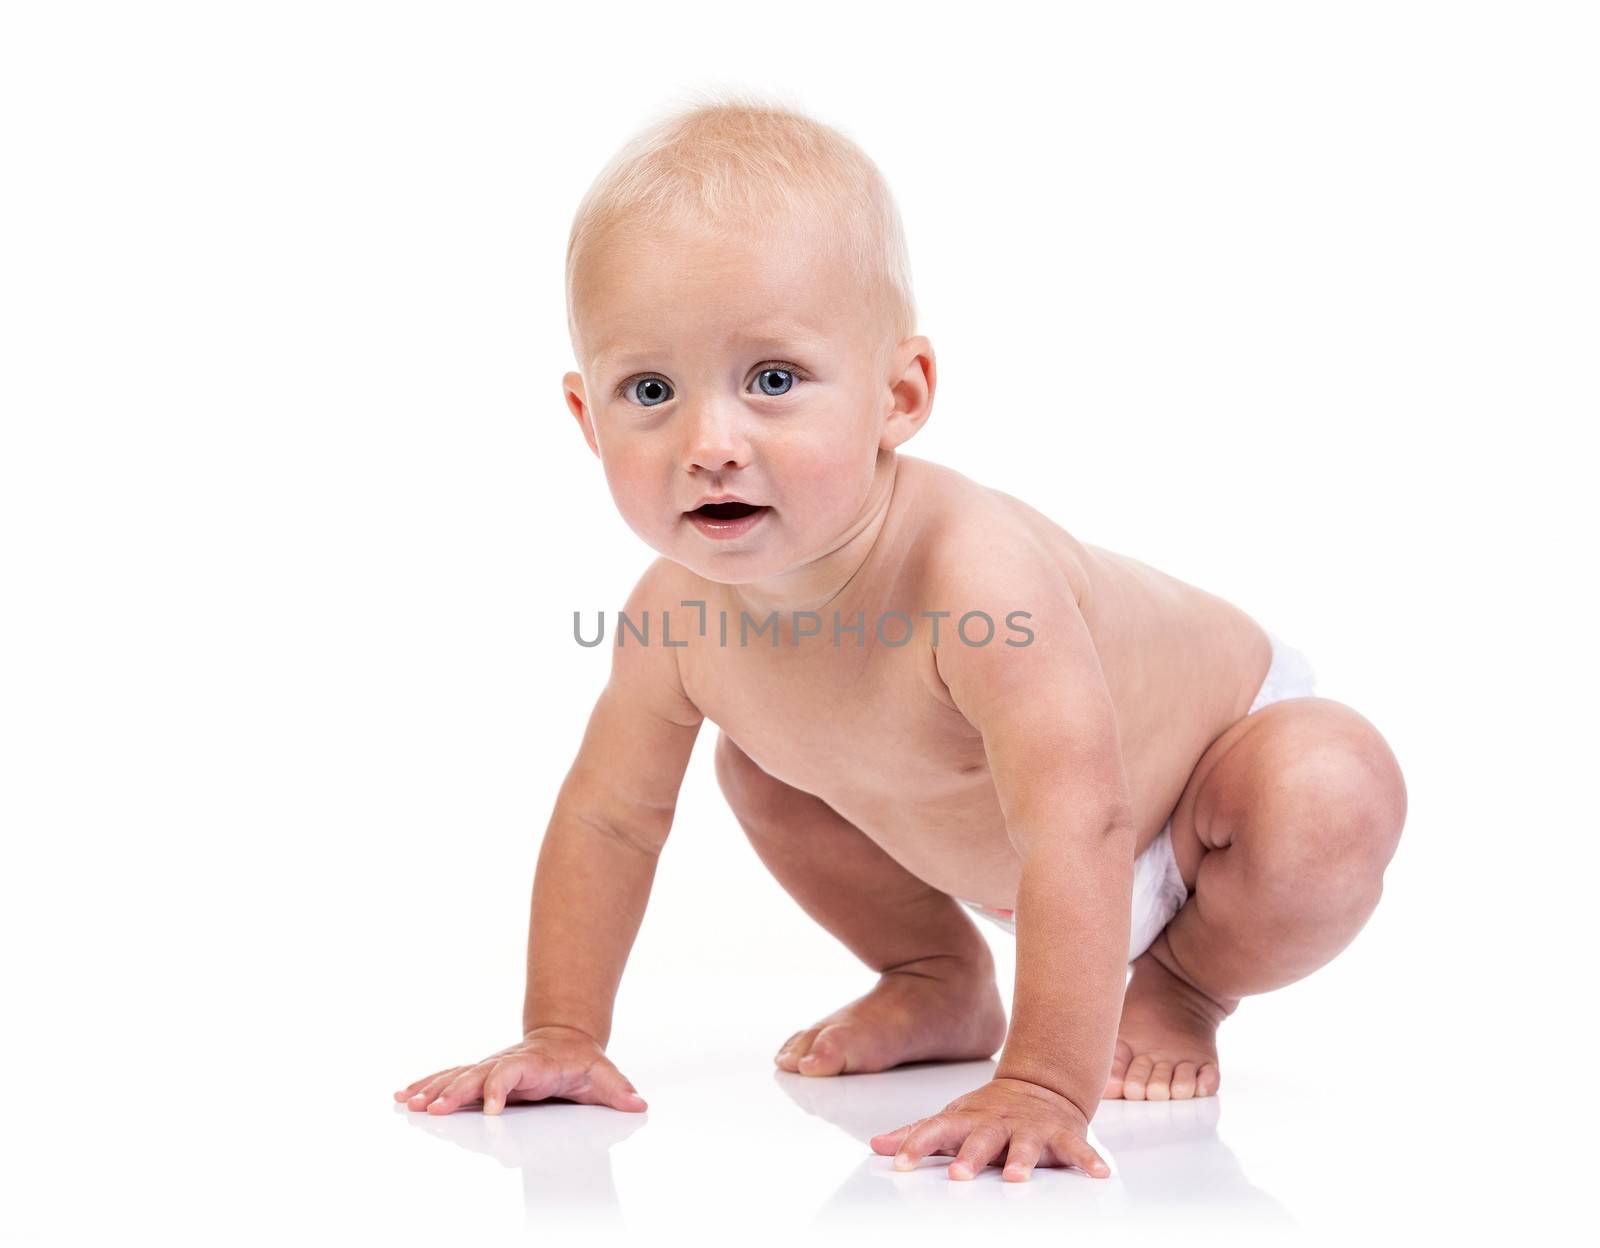 funny crawling baby boy over white background